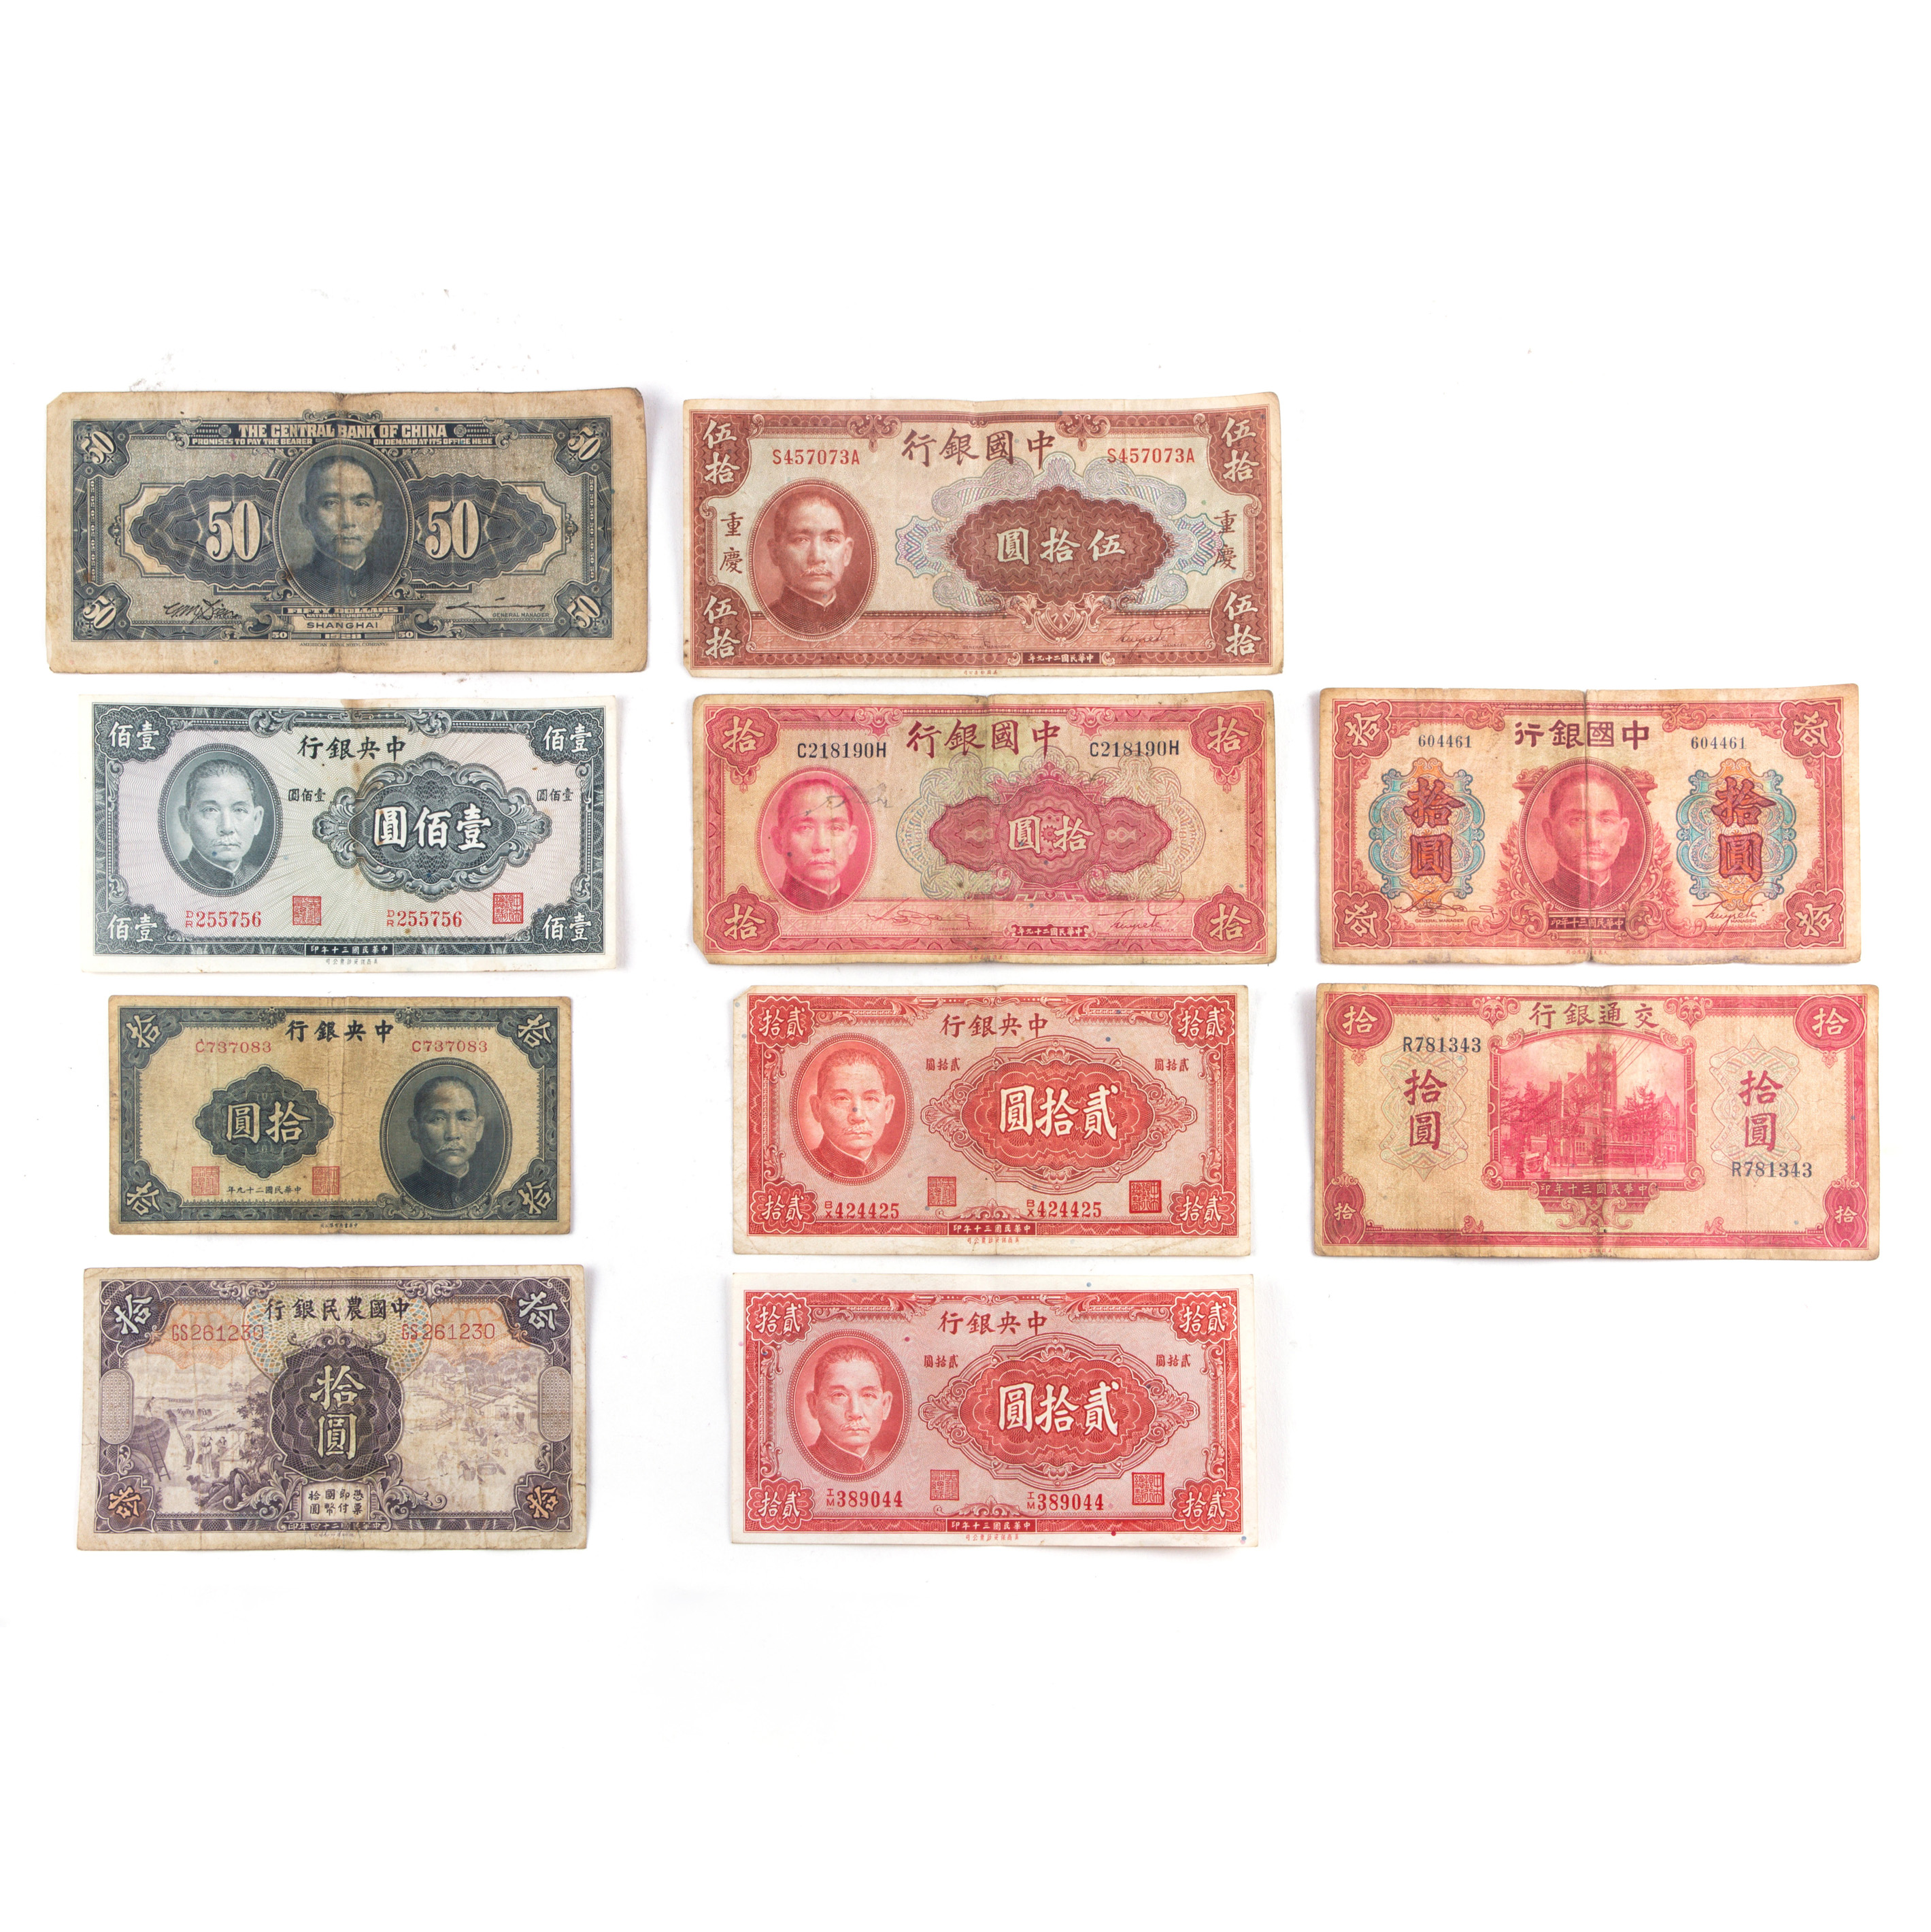  LOT OF 10 CHINESE CURRENCY 100 3a483d